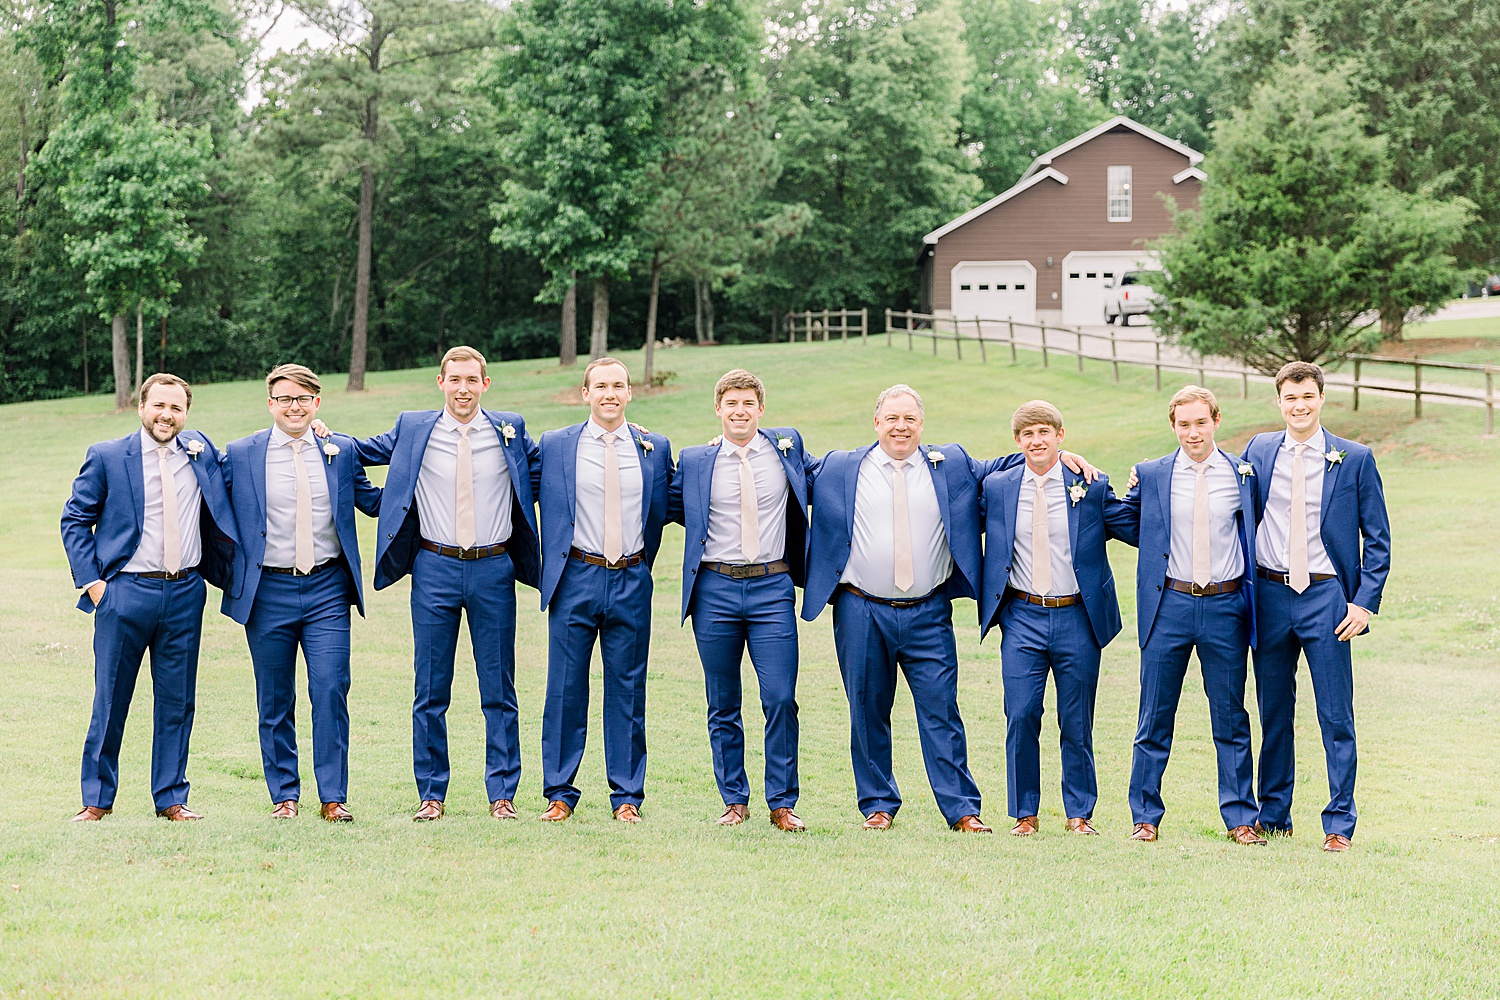 Groom and Groomsmen stand together before wedding ceremony in Alabama